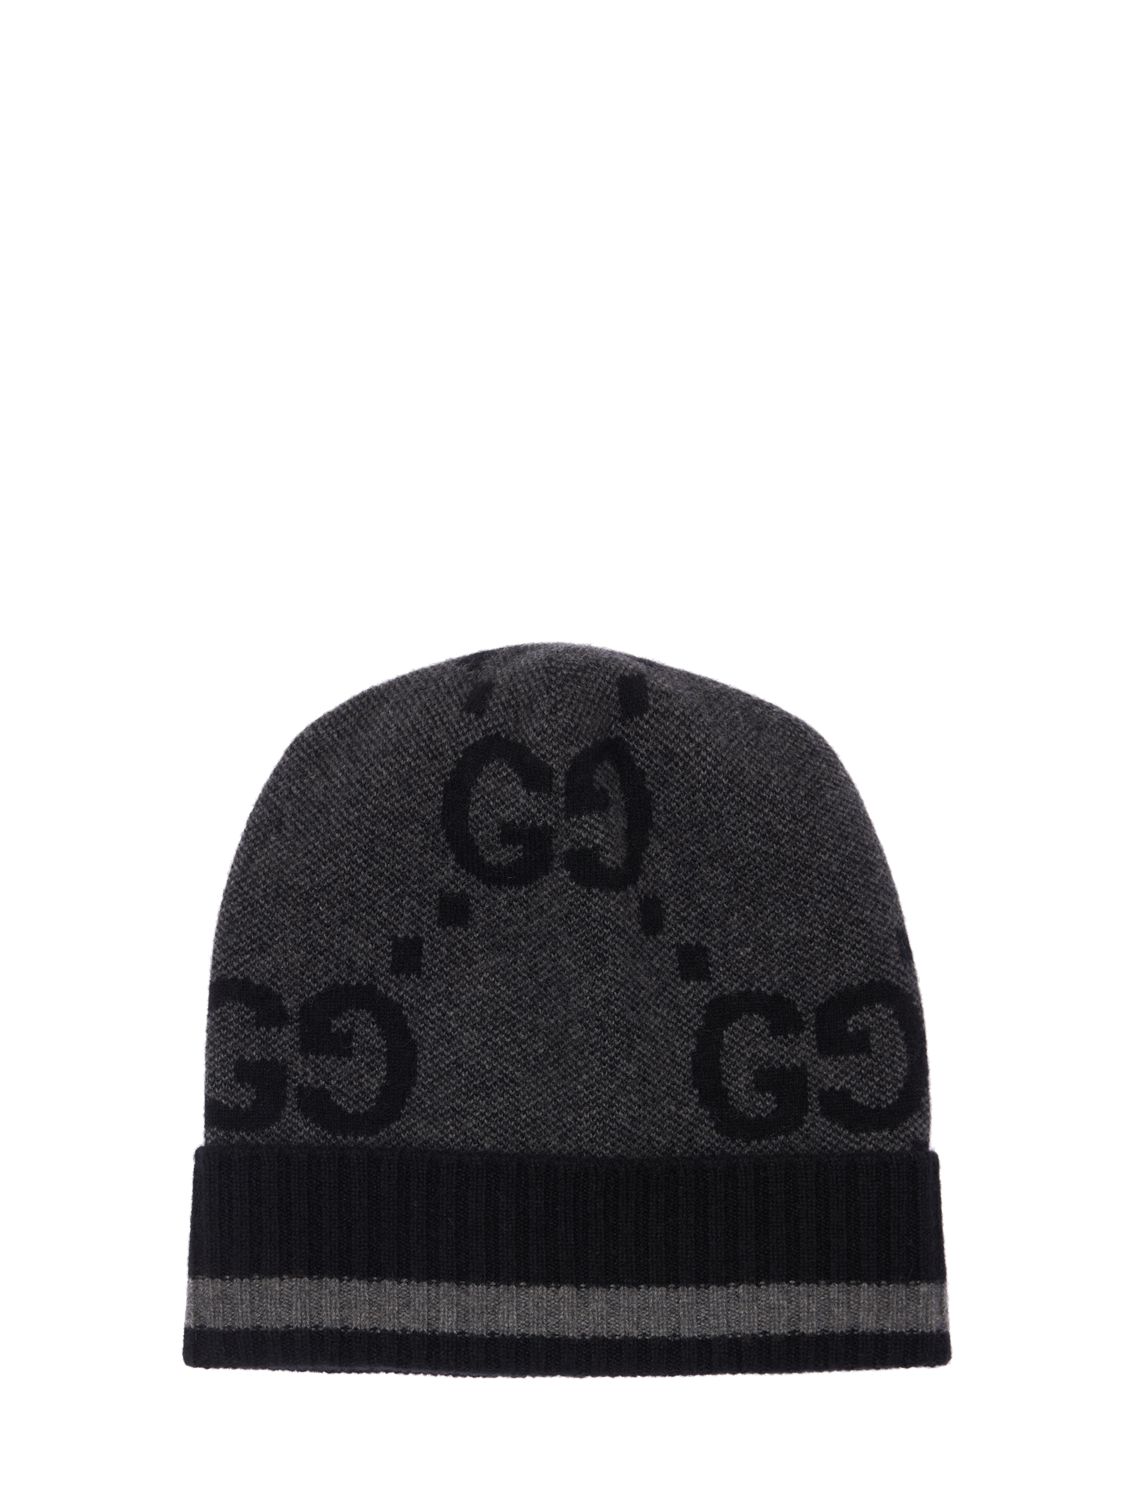 Canvy Cashmere Knit Beanie Hat